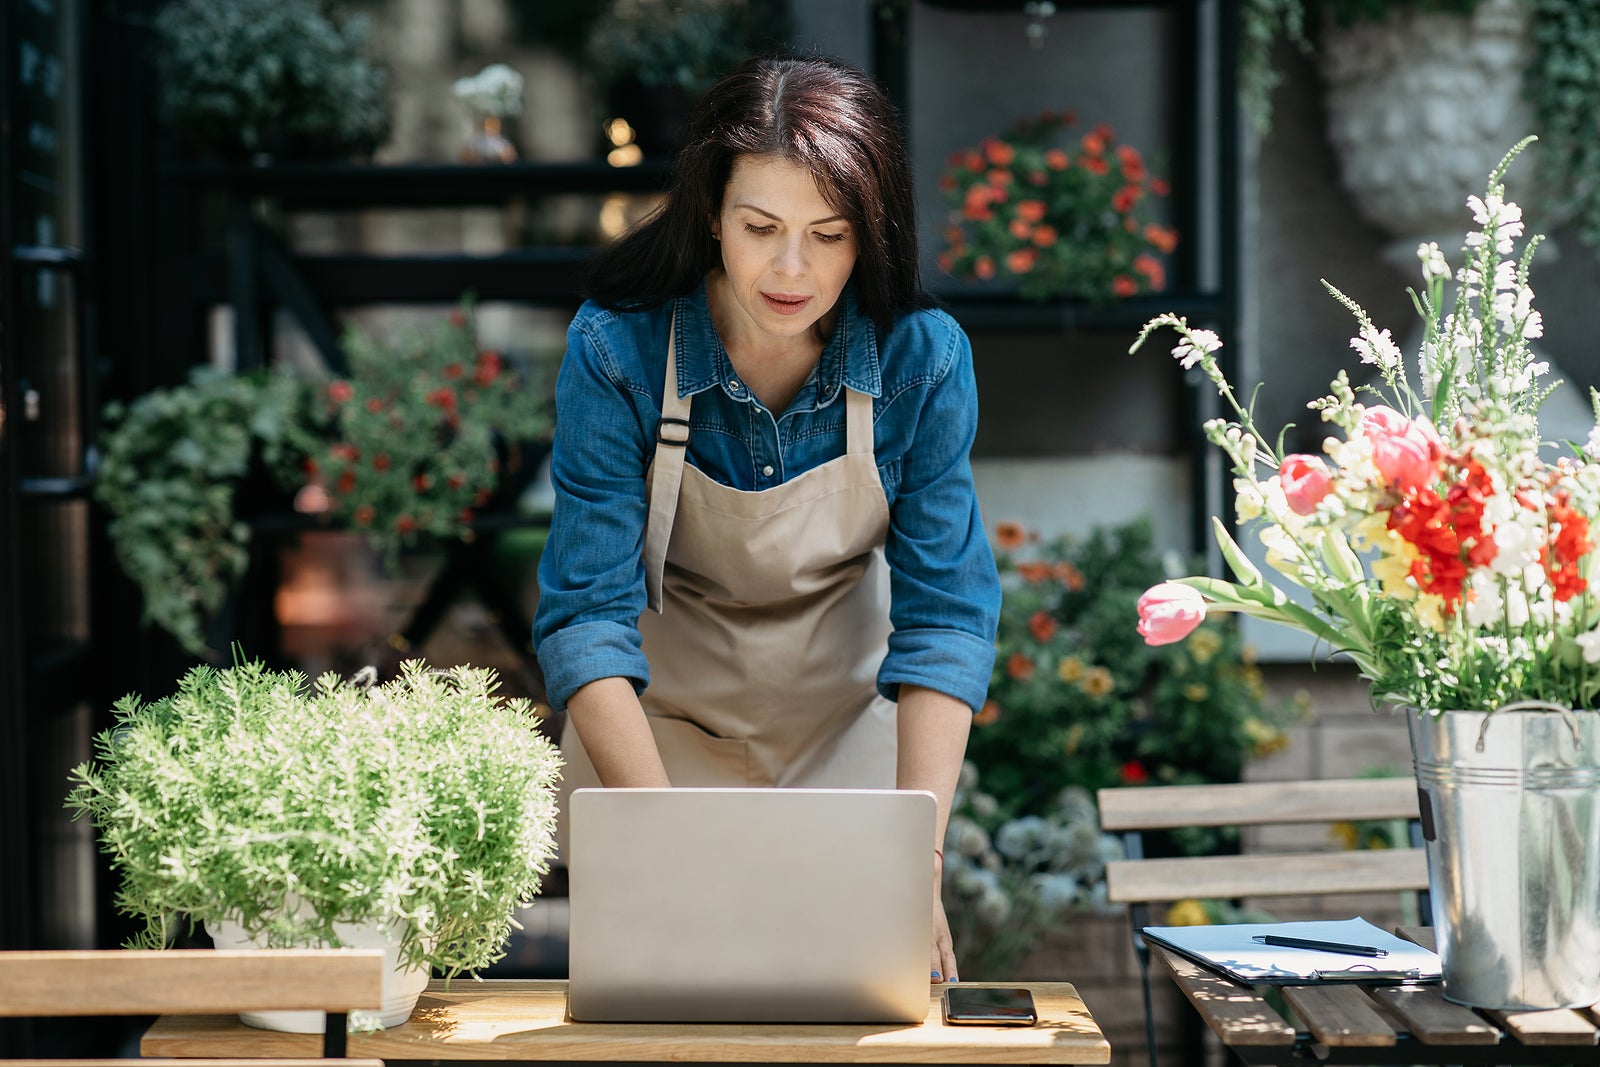 5 Small Business Resources to Consider Before Starting Your New Business